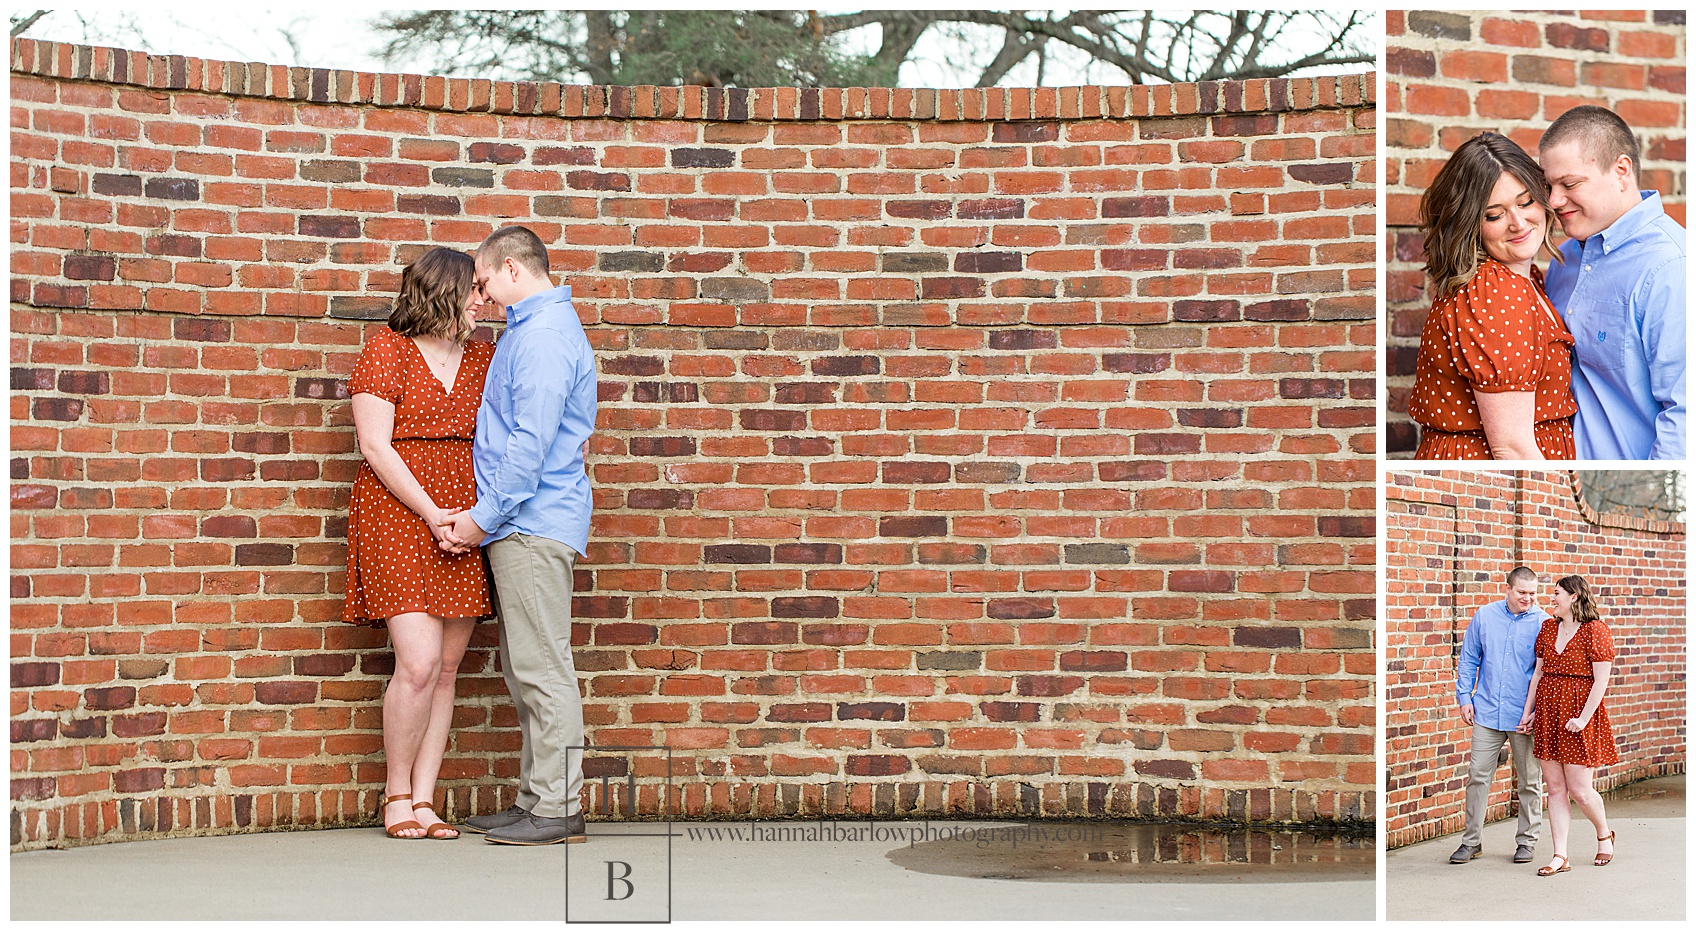 Engagement Photos by Brick of Couple in Orange and Blue Outfits